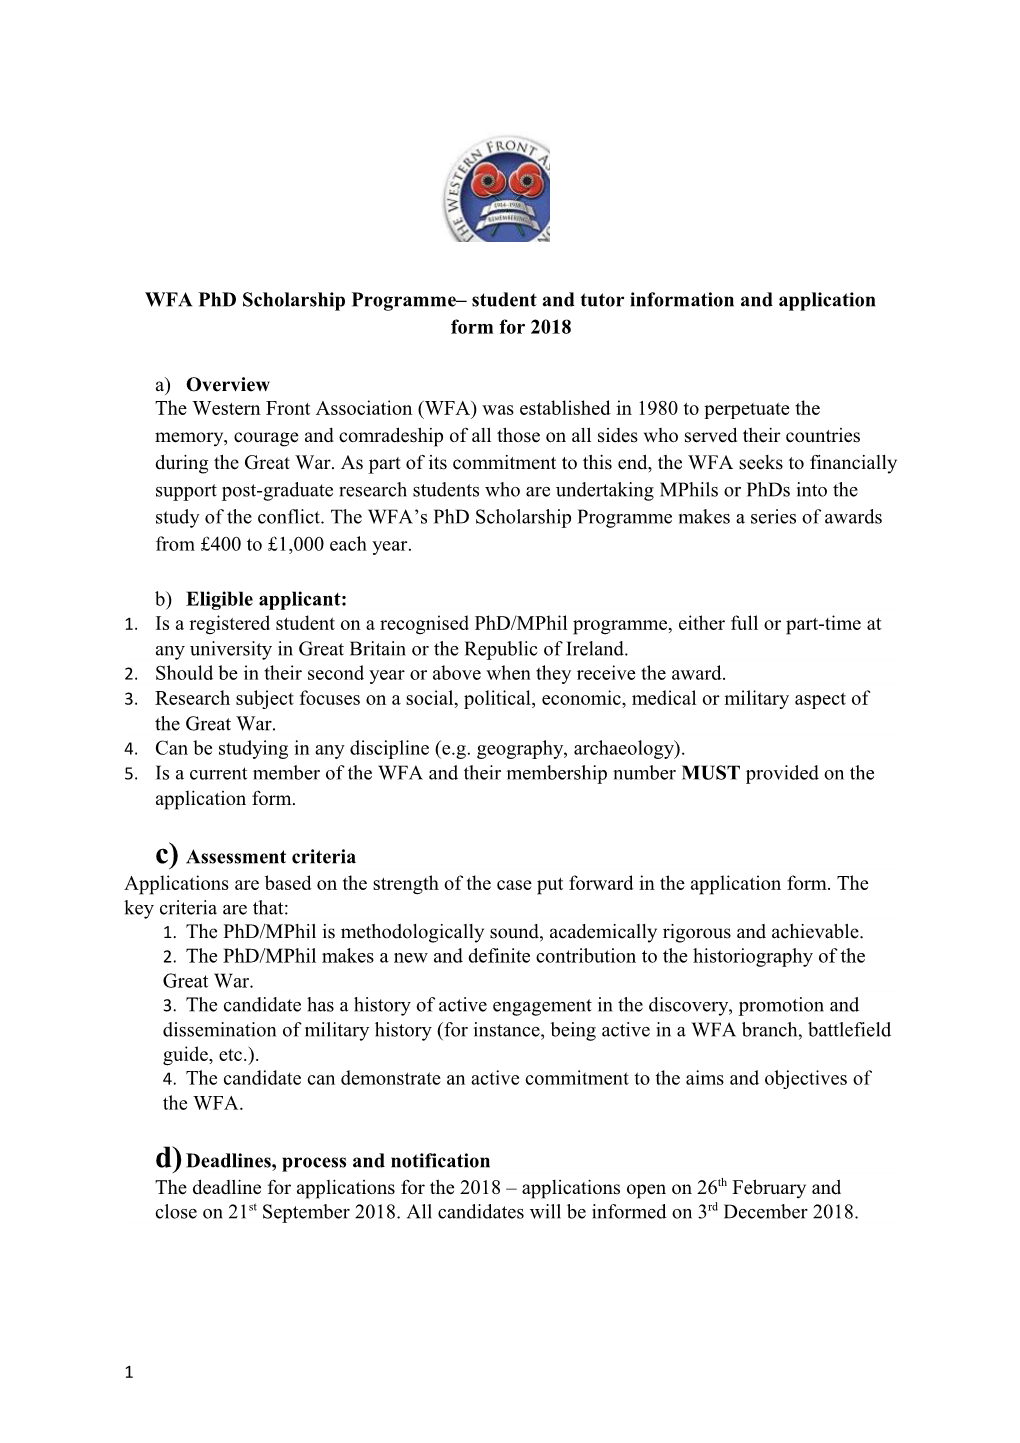 WFA Phd Scholarship Programme Student and Tutor Information and Application Formfor 2018